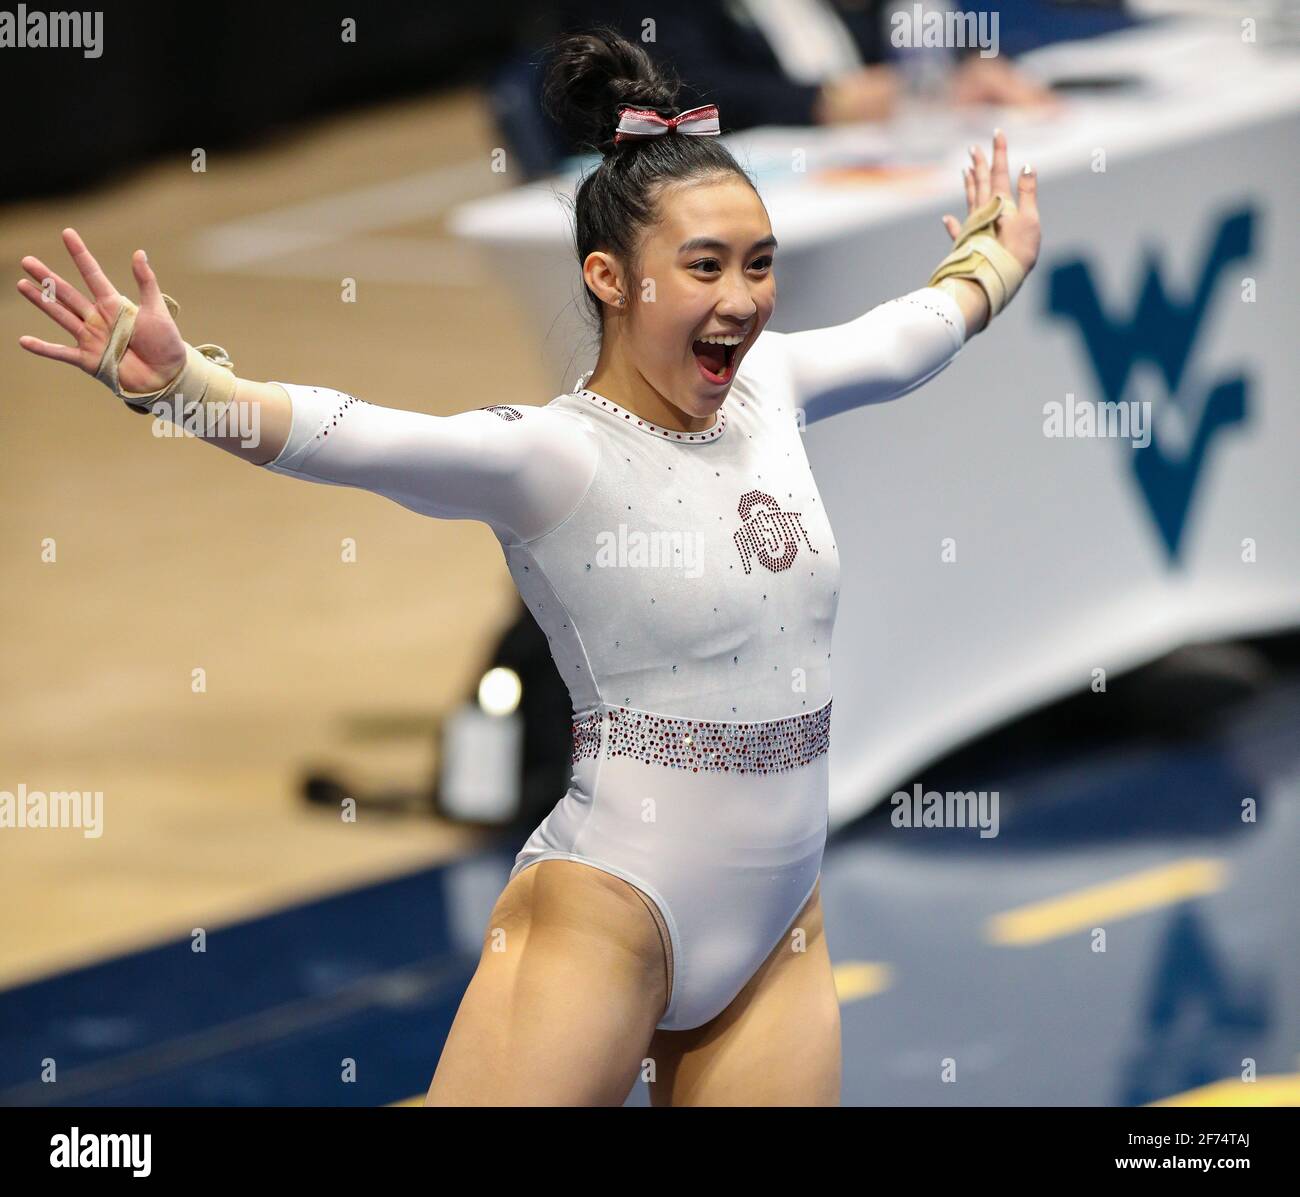 Morgantown, WV, USA. 2nd Apr, 2021. Ohio State's Alexis Haskins smiles as she competes on the floor during the Session 1 of the NCAA Gymnastics Morgantown Regional at the WVU Coliseum in Morgantown, WV. Kyle Okita/CSM/Alamy Live News Stock Photo